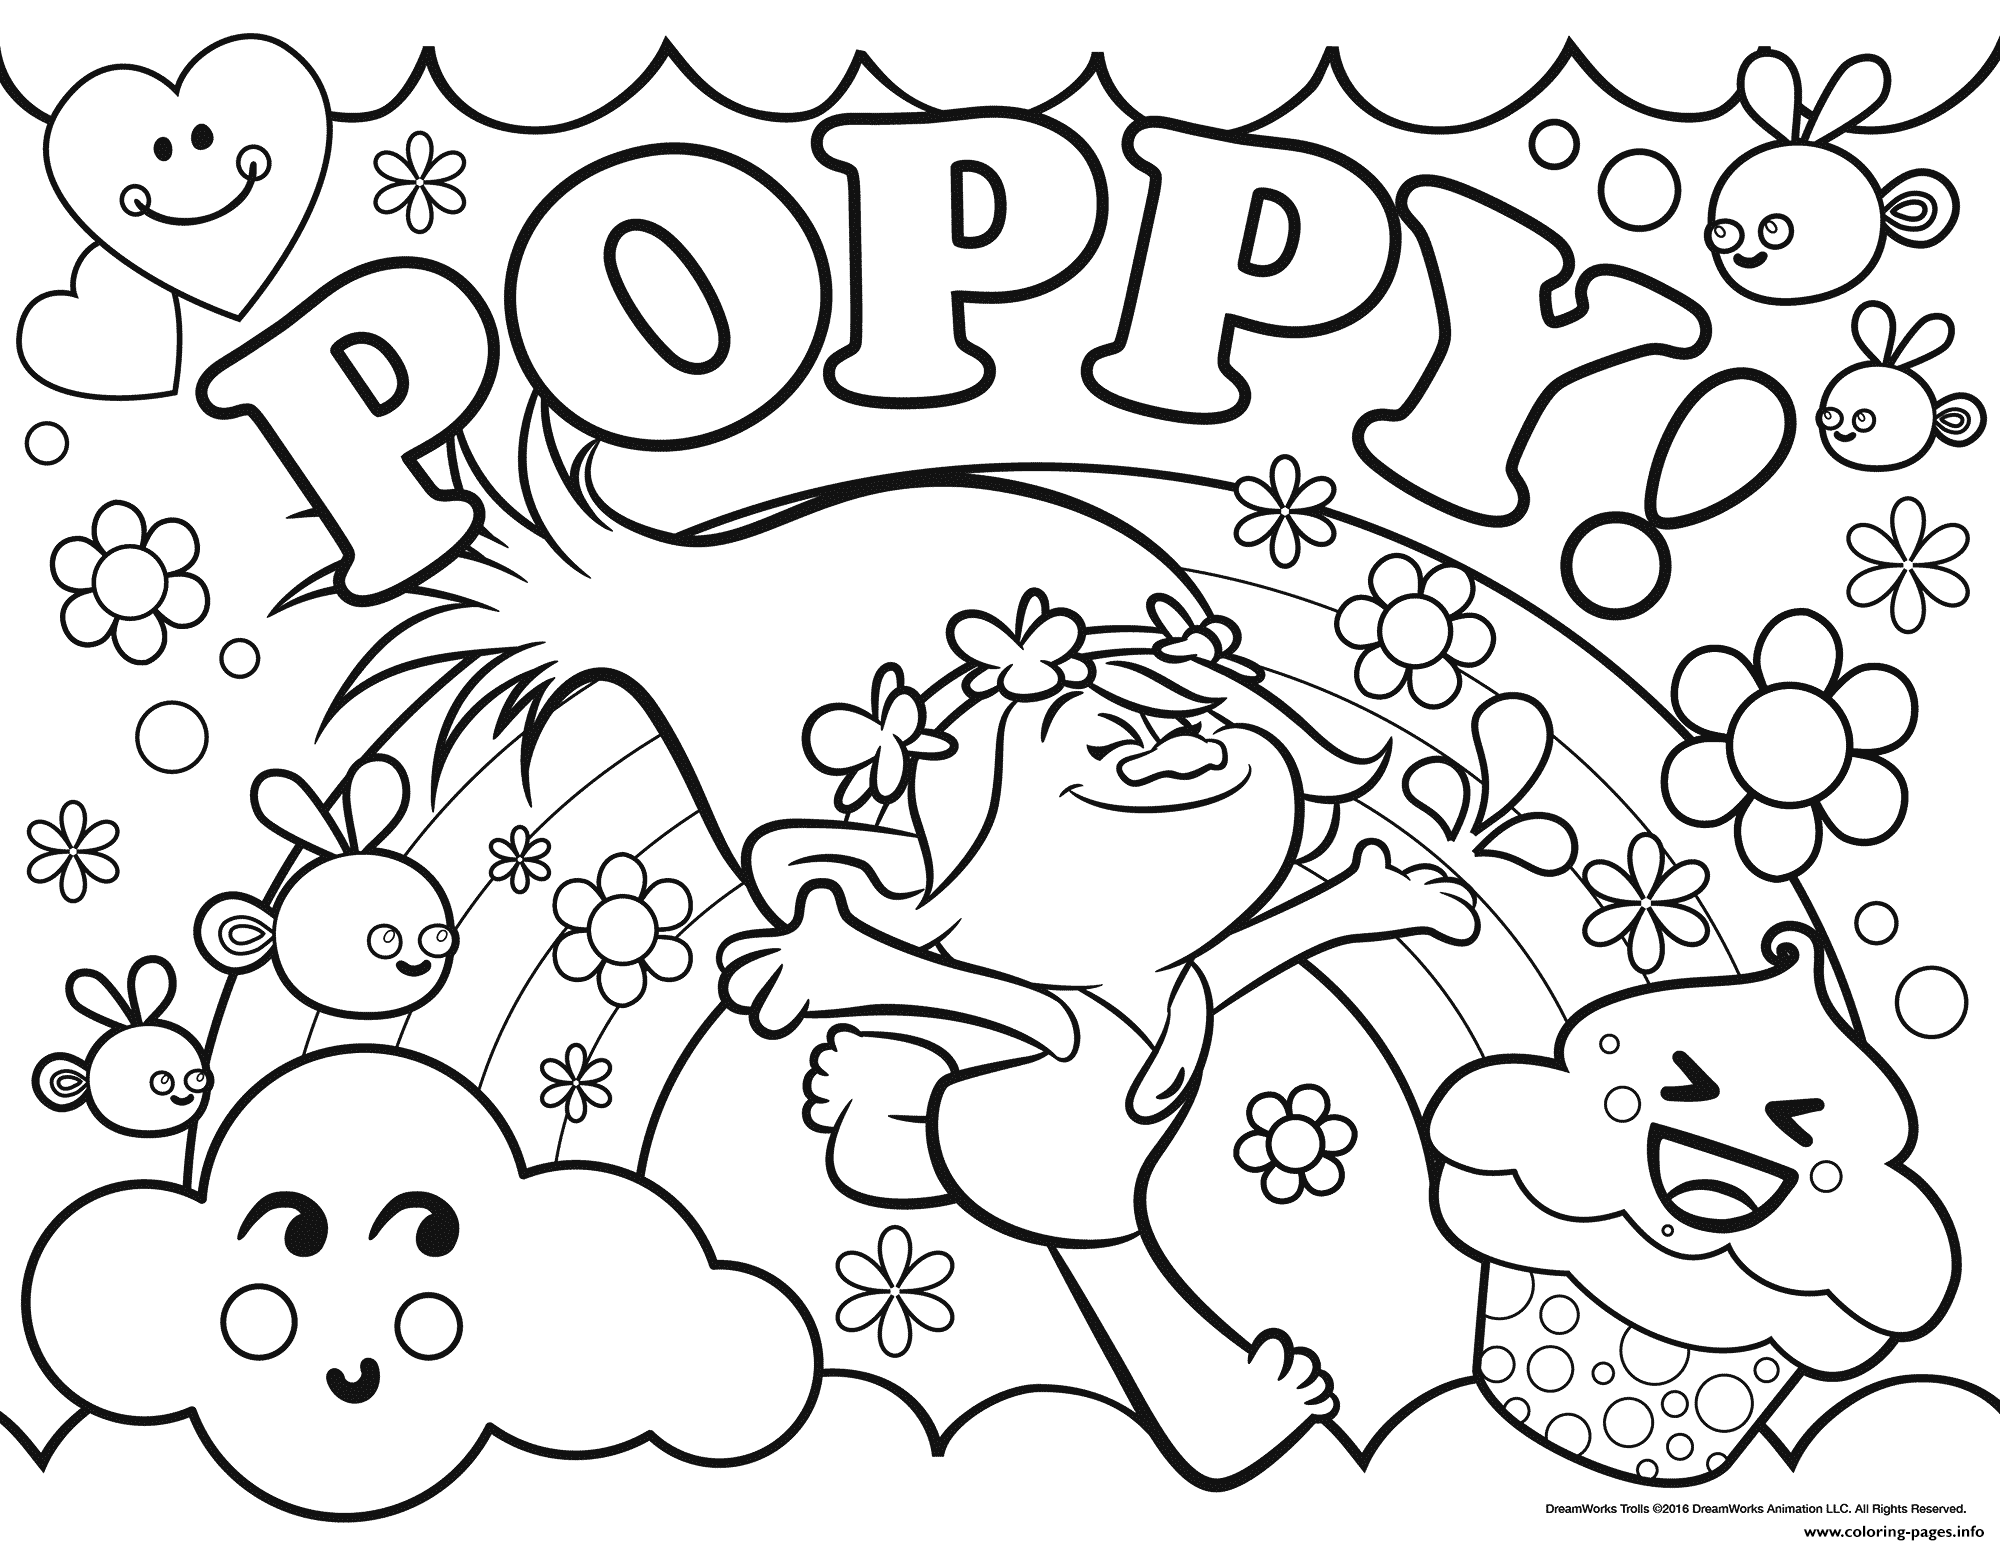 activity village poppy coloring pages - photo #32